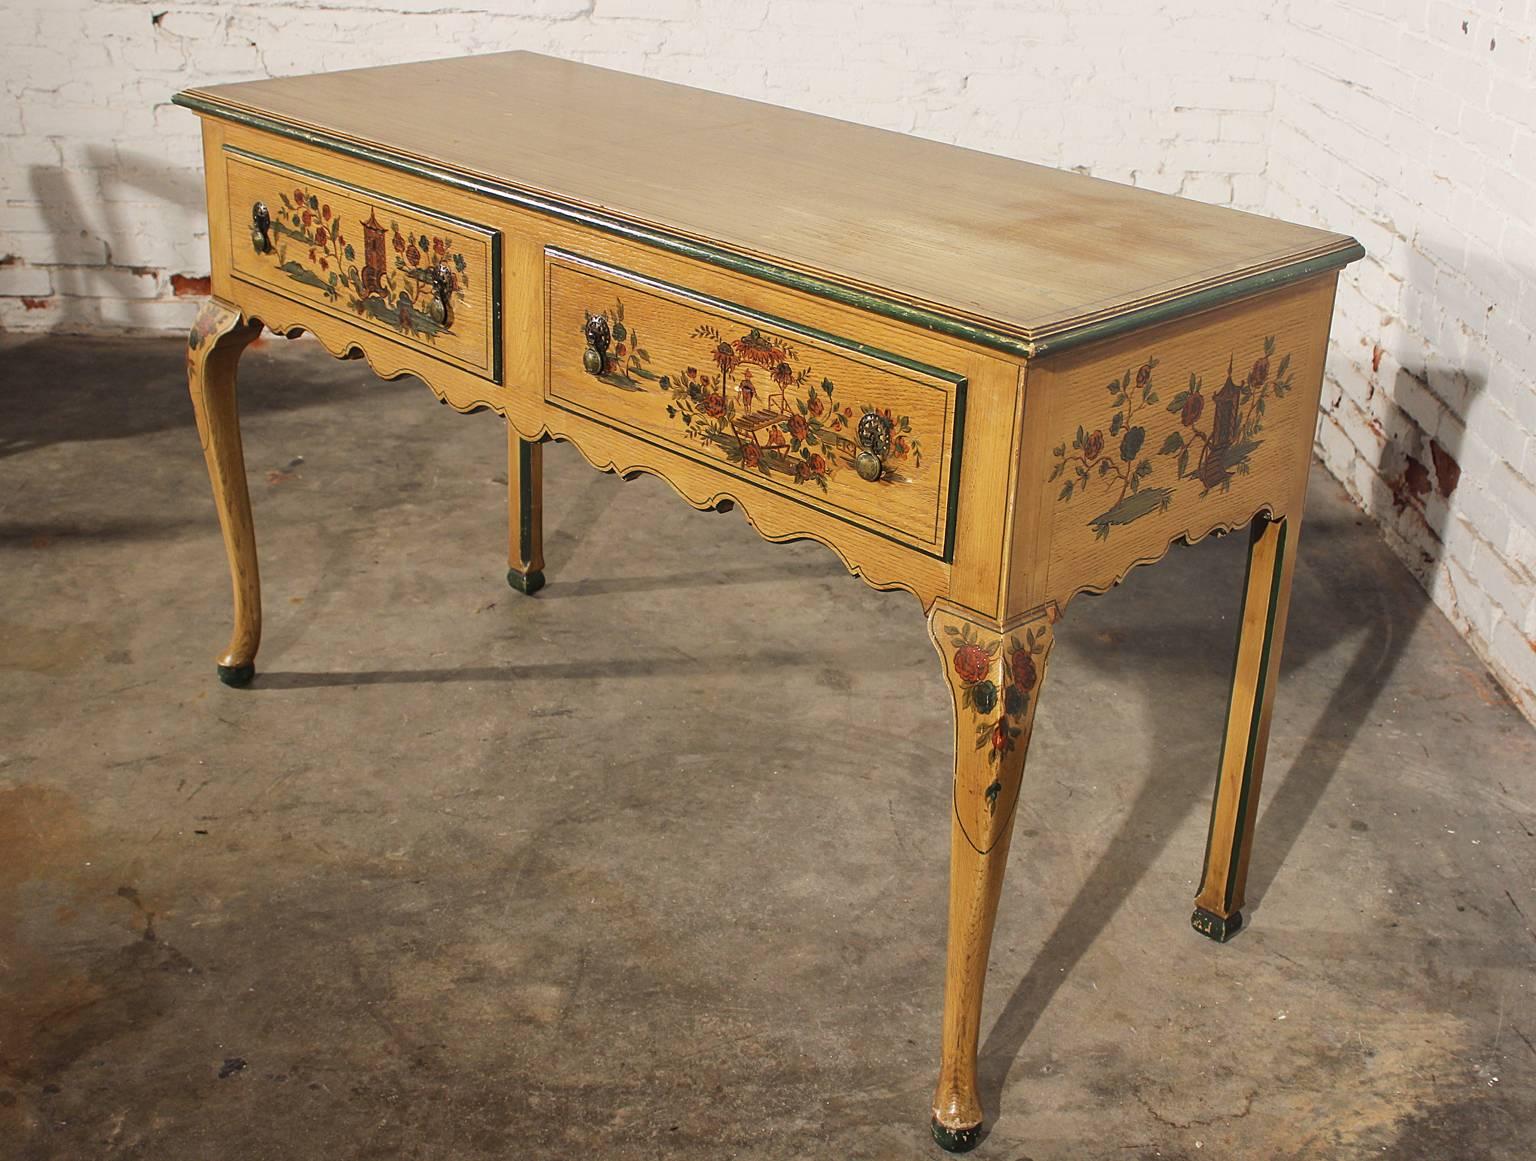 Incredible antique hunt style buffet server with cabriole legs and chinoiserie hand-painted design. This piece is in wonderful vintage condition. Any imperfections only serve to enhance its beautiful age patina. Just look at the fabulous